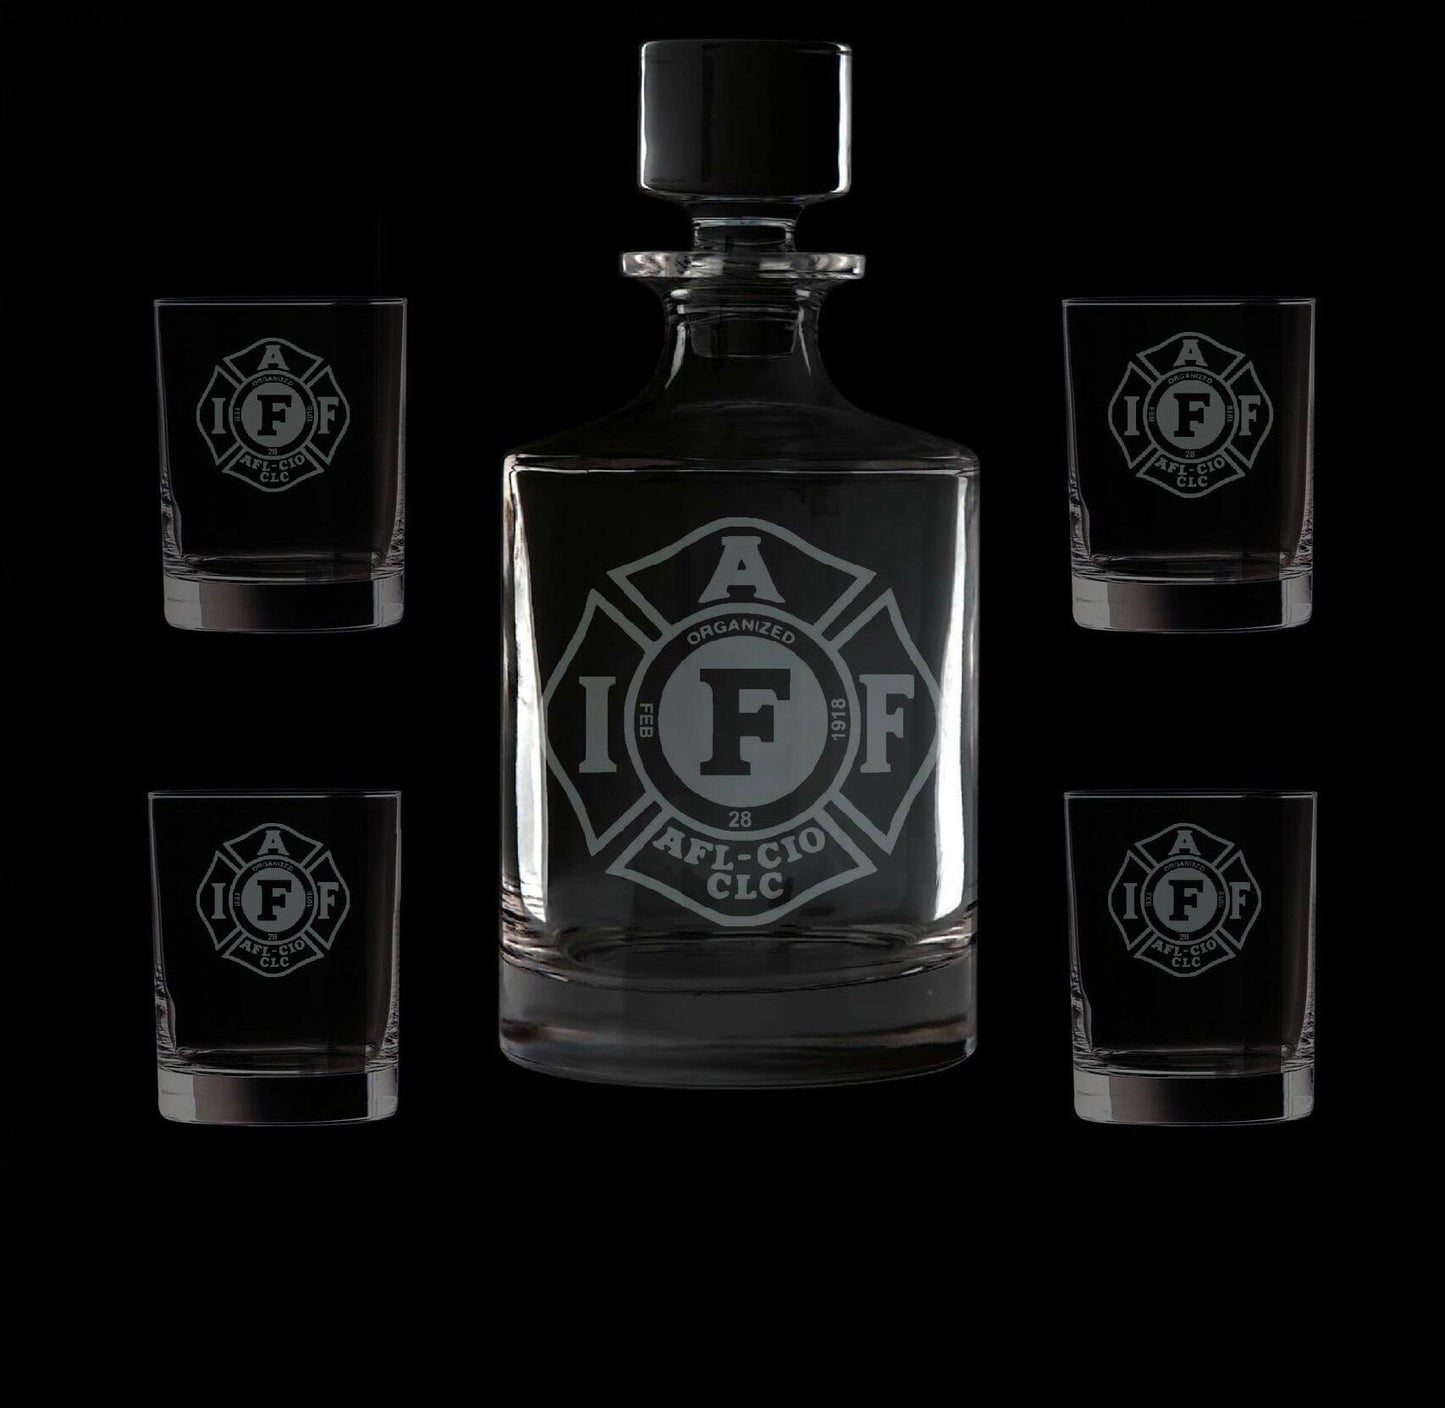 IAFF Officially Licensed 25 Ounce Whiskey Decanter With Optional Rocks Glasses